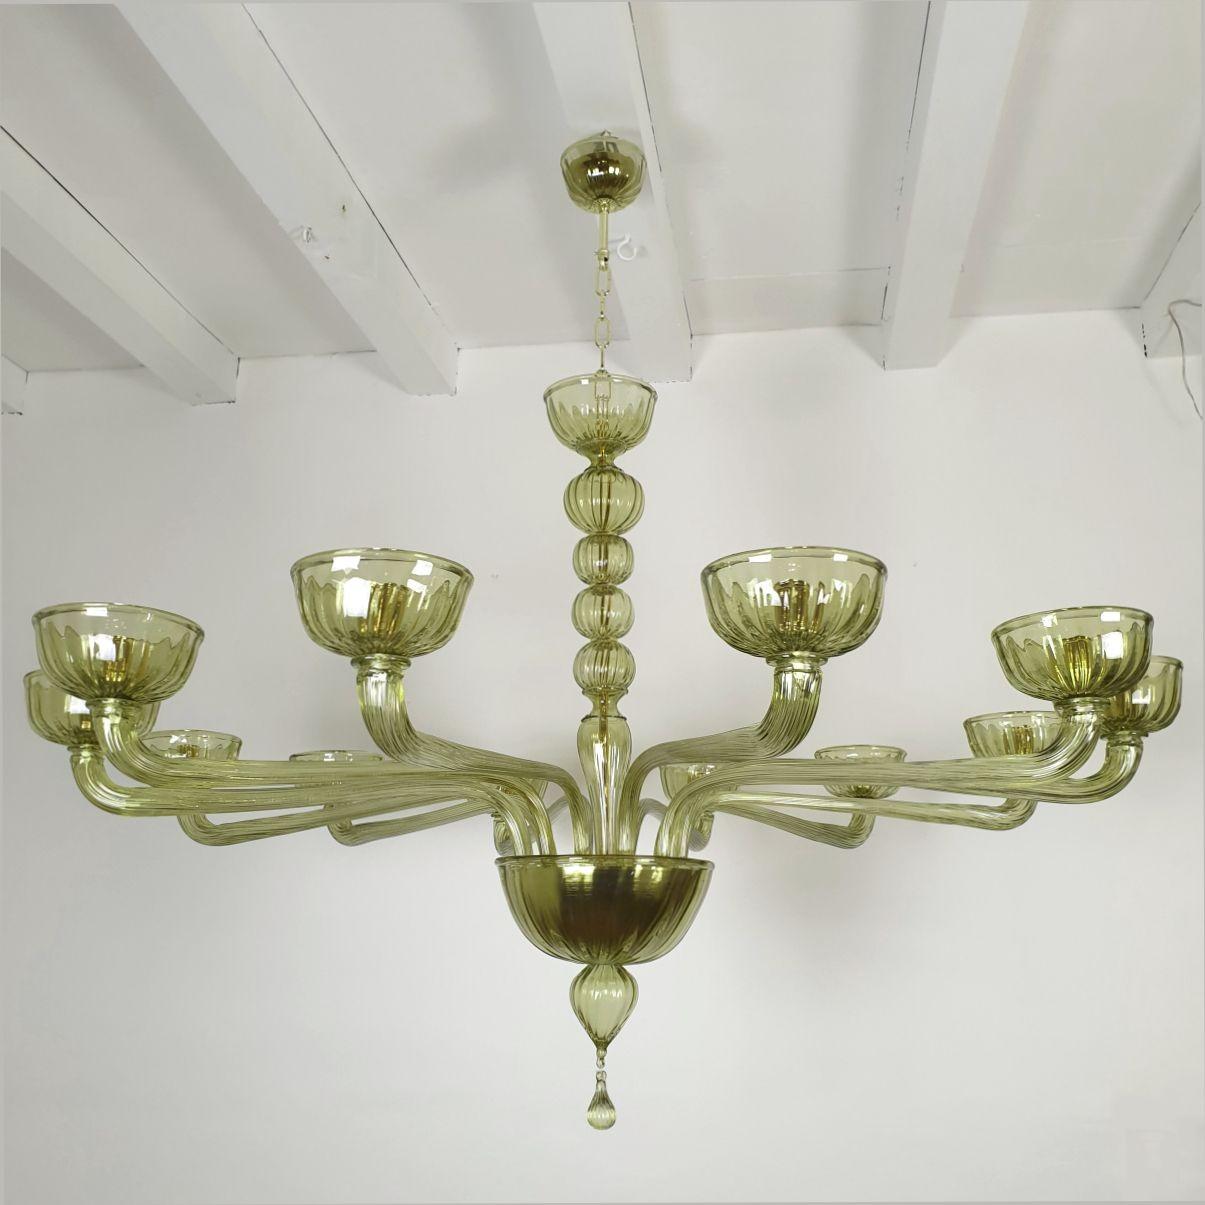 Extra large green hand blow Murano glass chandelier, attributed to Venini, Italy 1980s.
The neoclassical style chandelier has gold plated mounts.
The Murano glass color is a light olive green.
The large Mid Century Modern chandelier has twelve